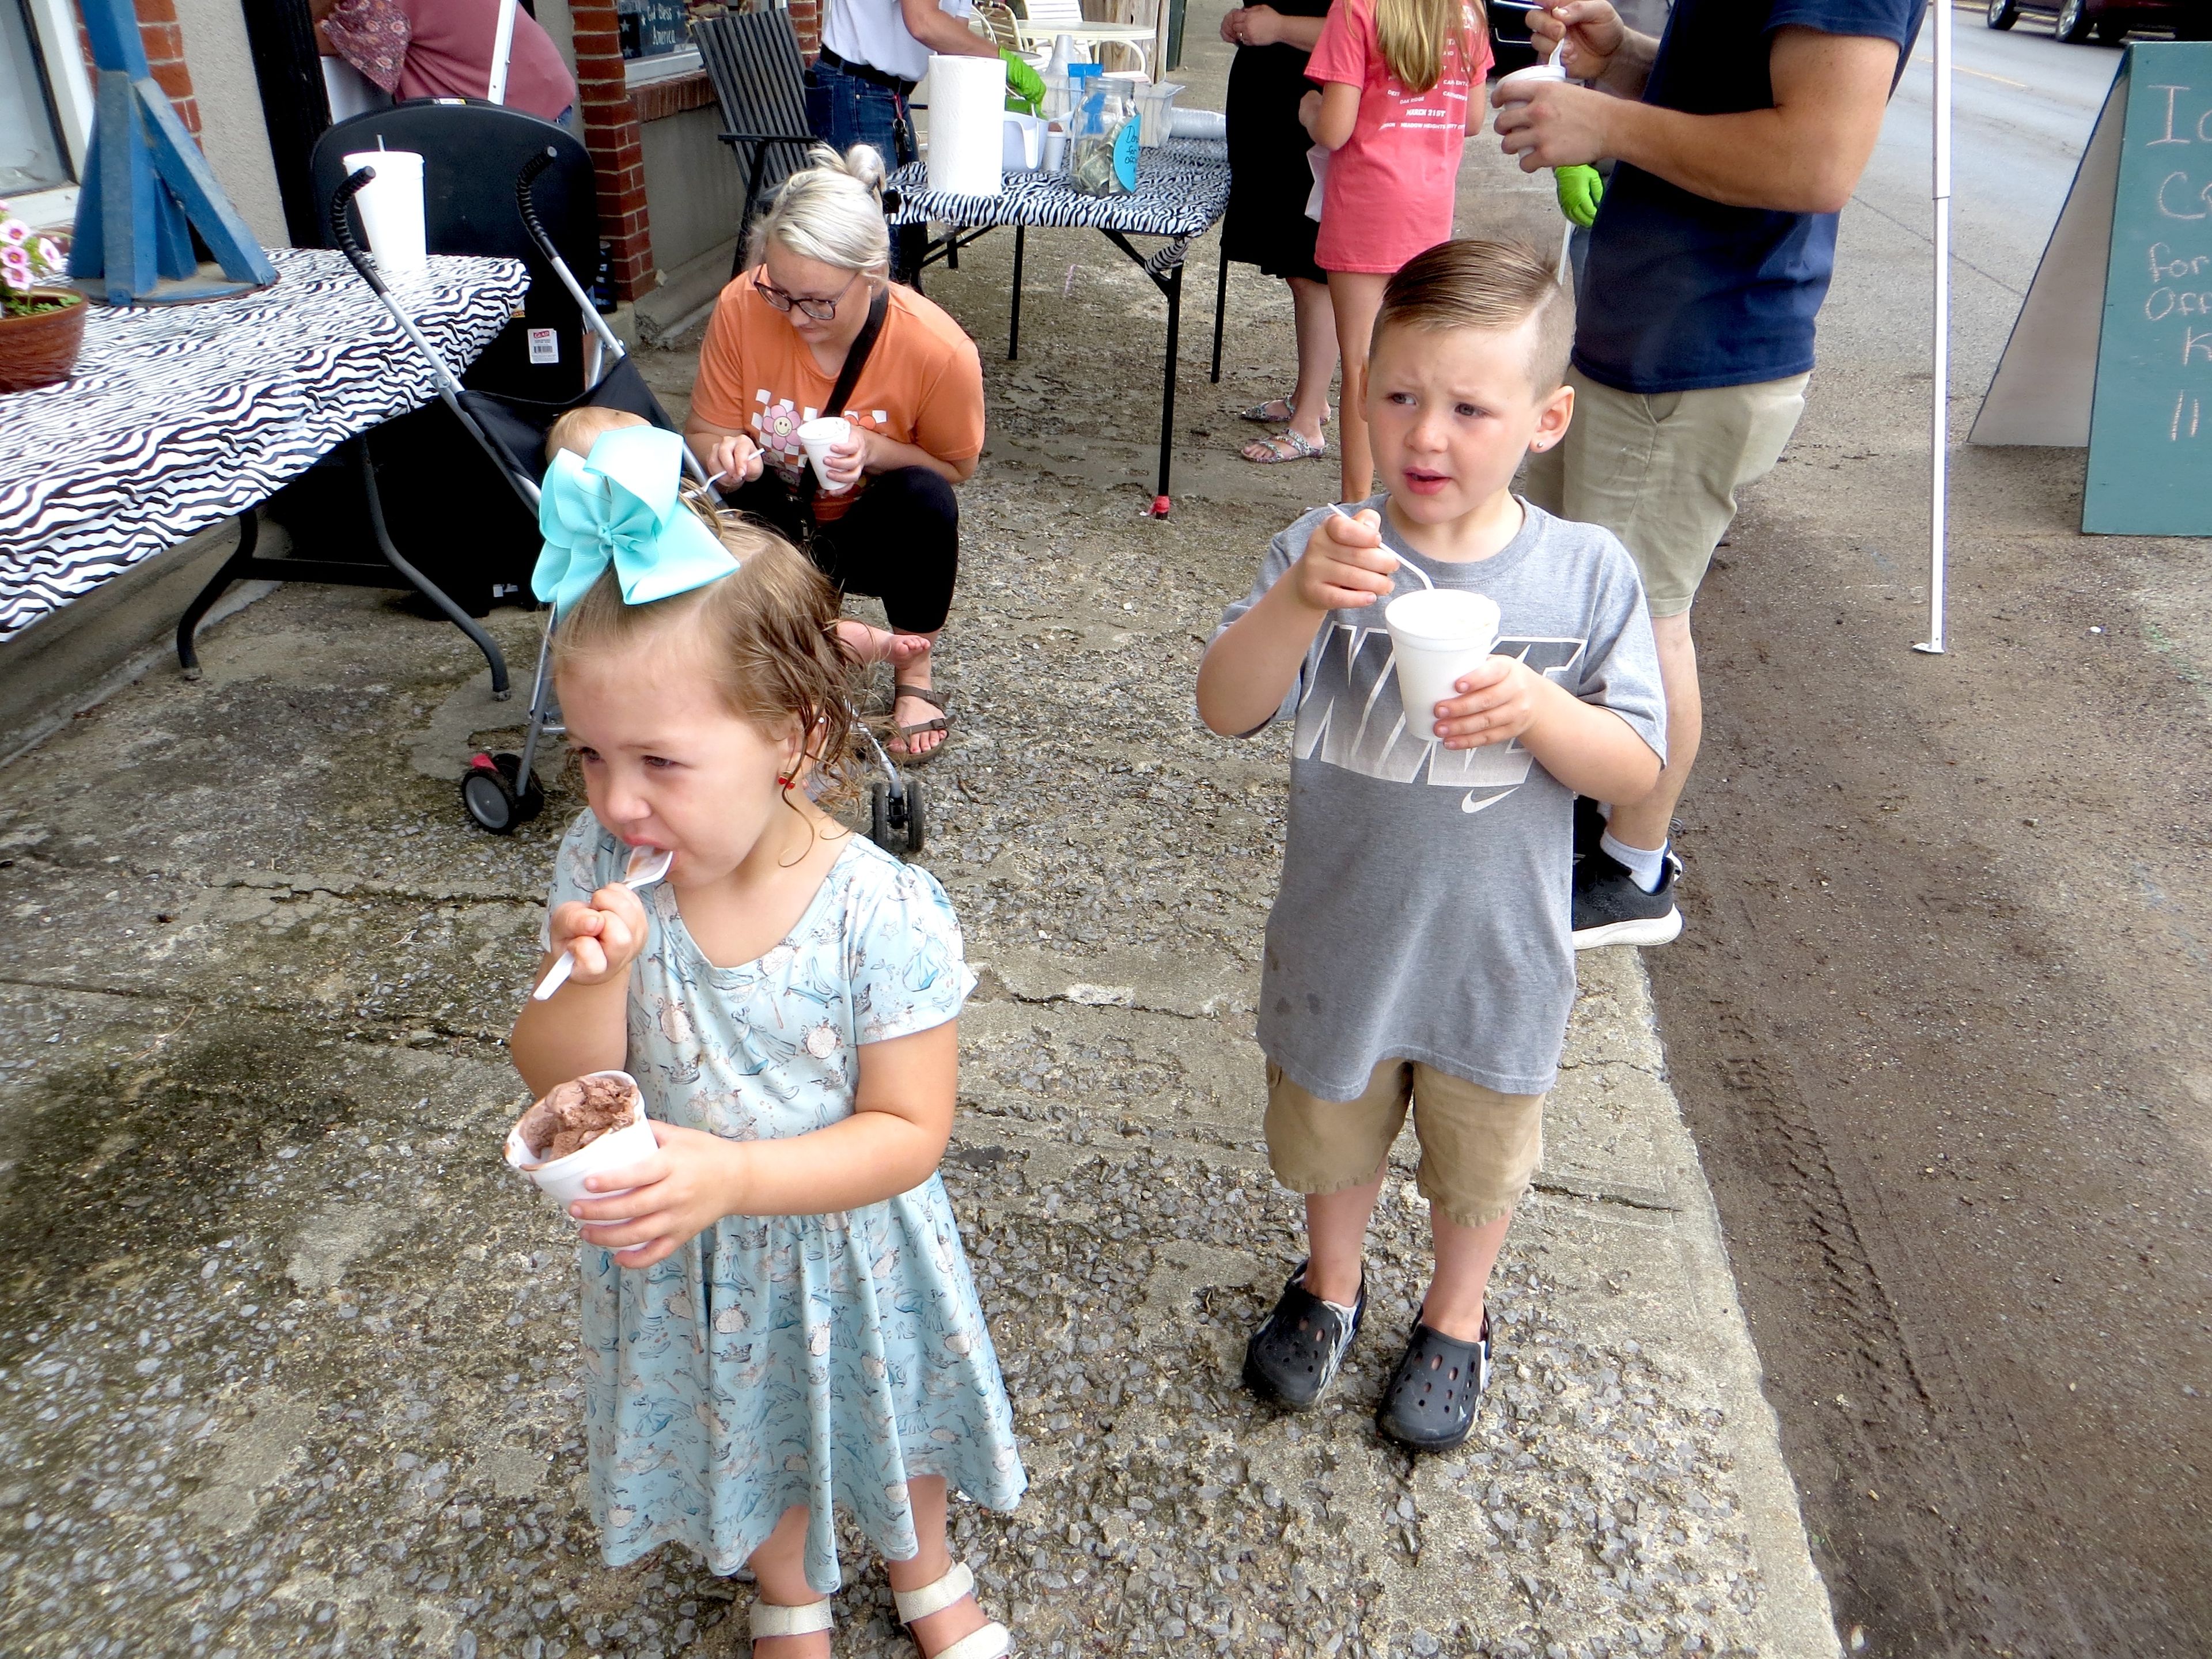 
Laken and River Cook of Marble Hill enjoy ice cream while their mother, Taylor Cook, offers baby Rowdy a few bites.